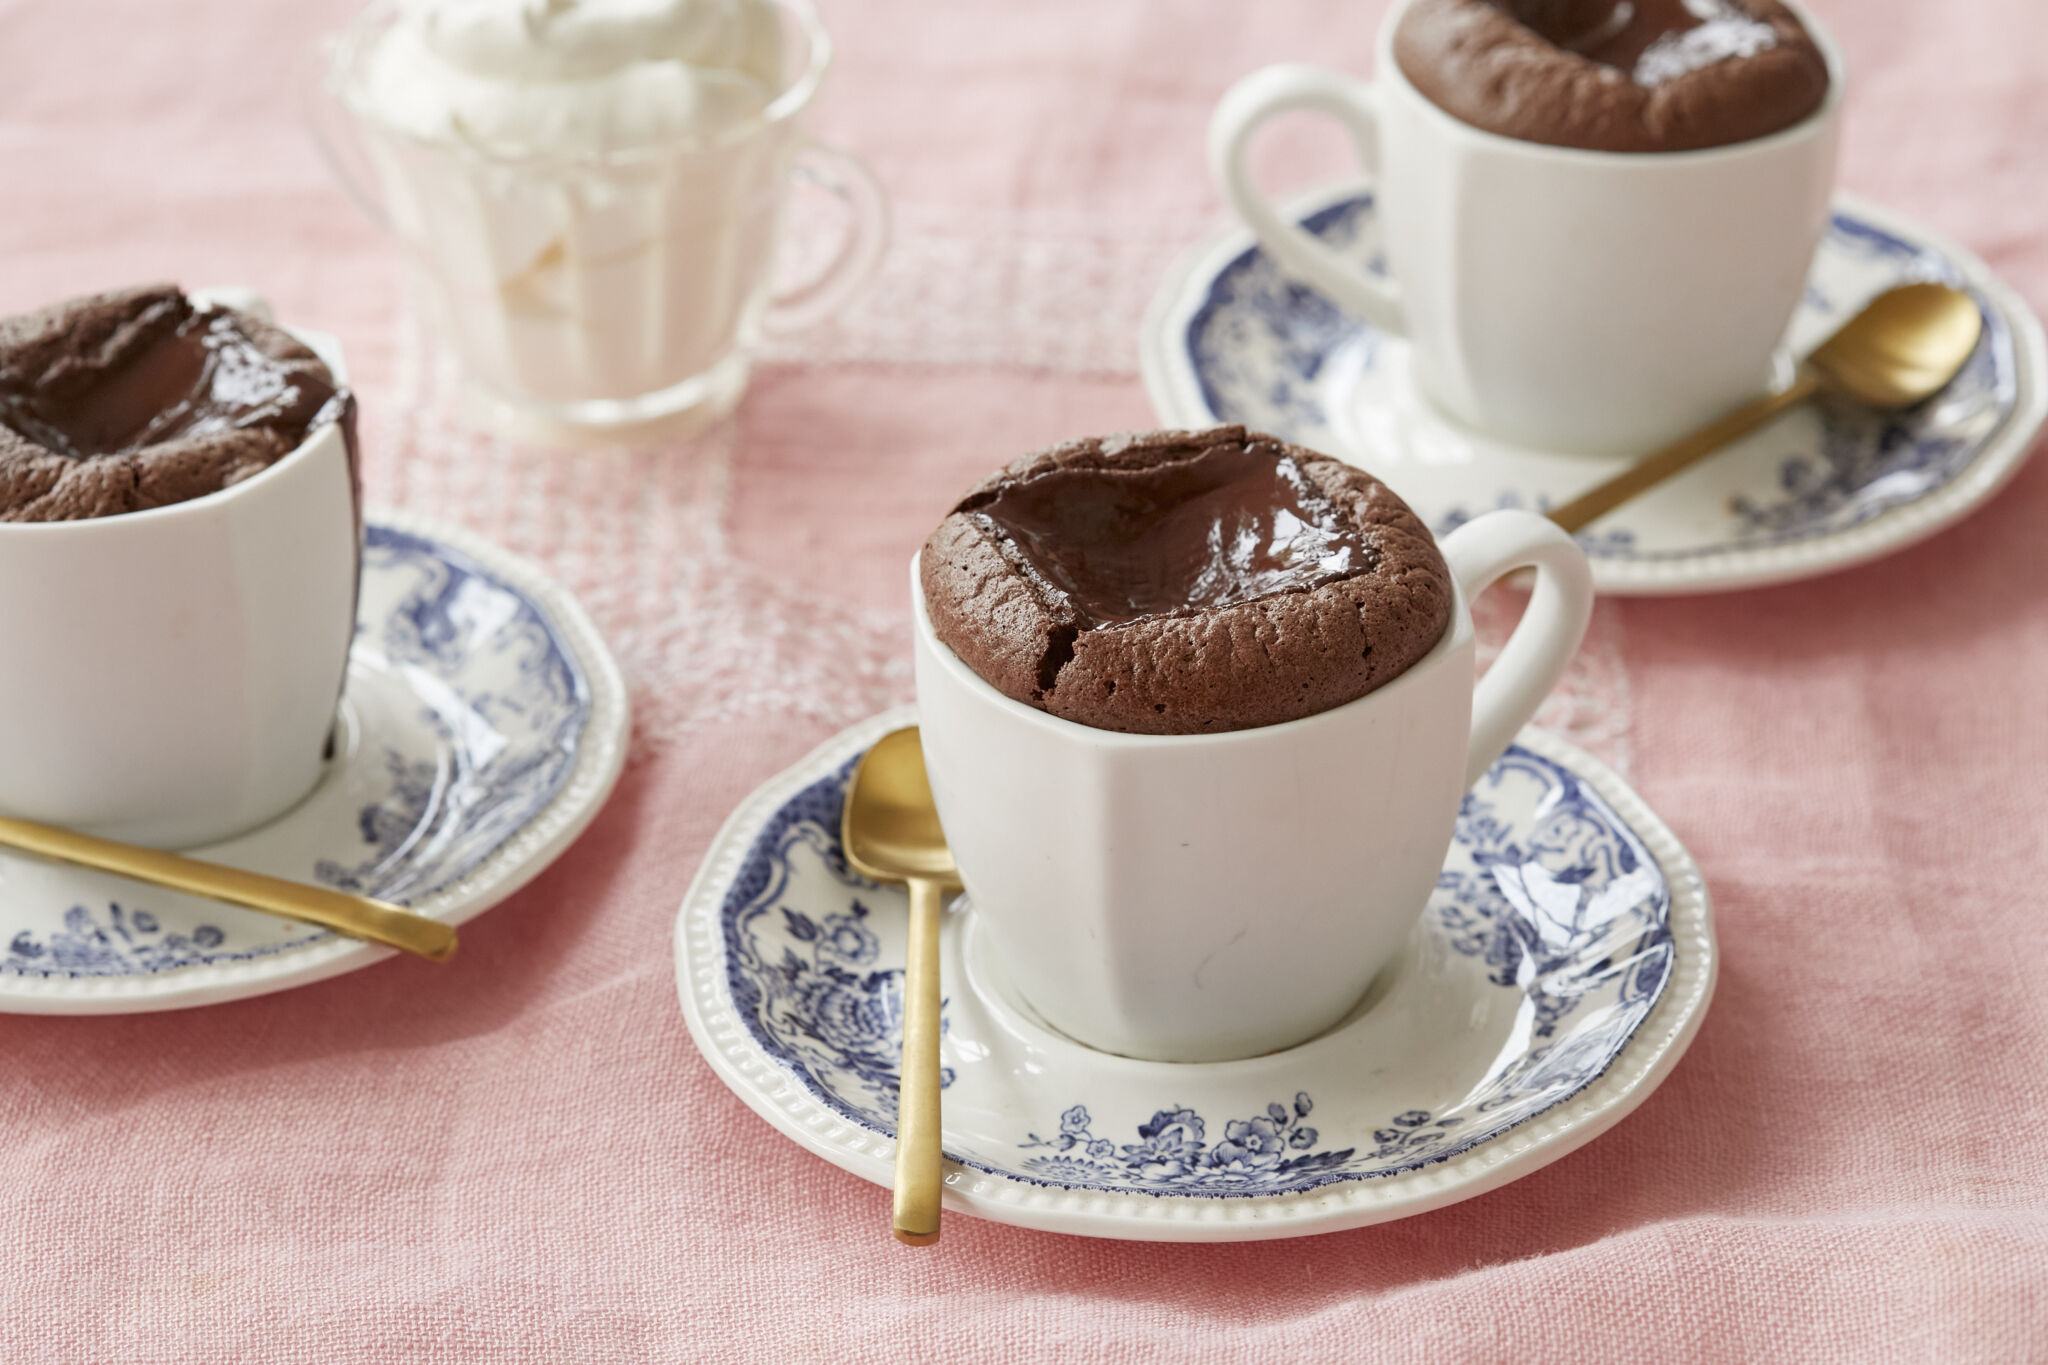 Baked hot chocolate is served in two white mugs on blue floral saucers with golden spoons. A glass cup of whipped cream is on the side. It's both light and rich, with an addictive contrast between the melty center and the surrounding soufflé-like cake.